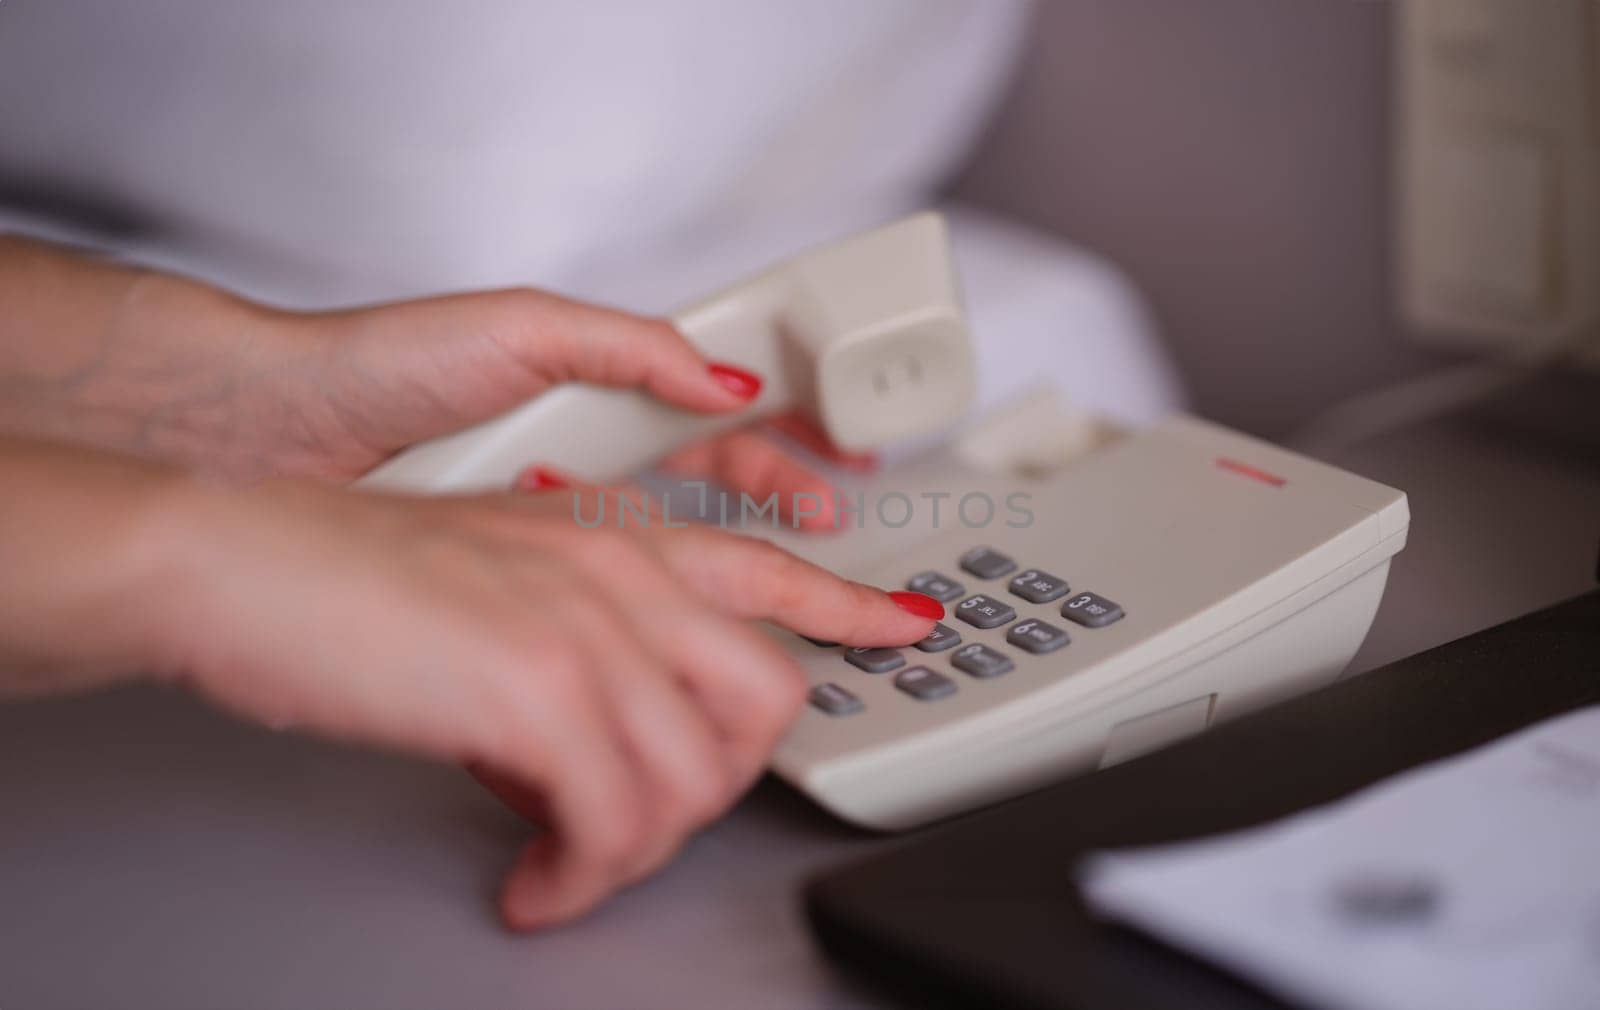 Business woman dialing phone number in hotel room. Hotel services and staff call concept